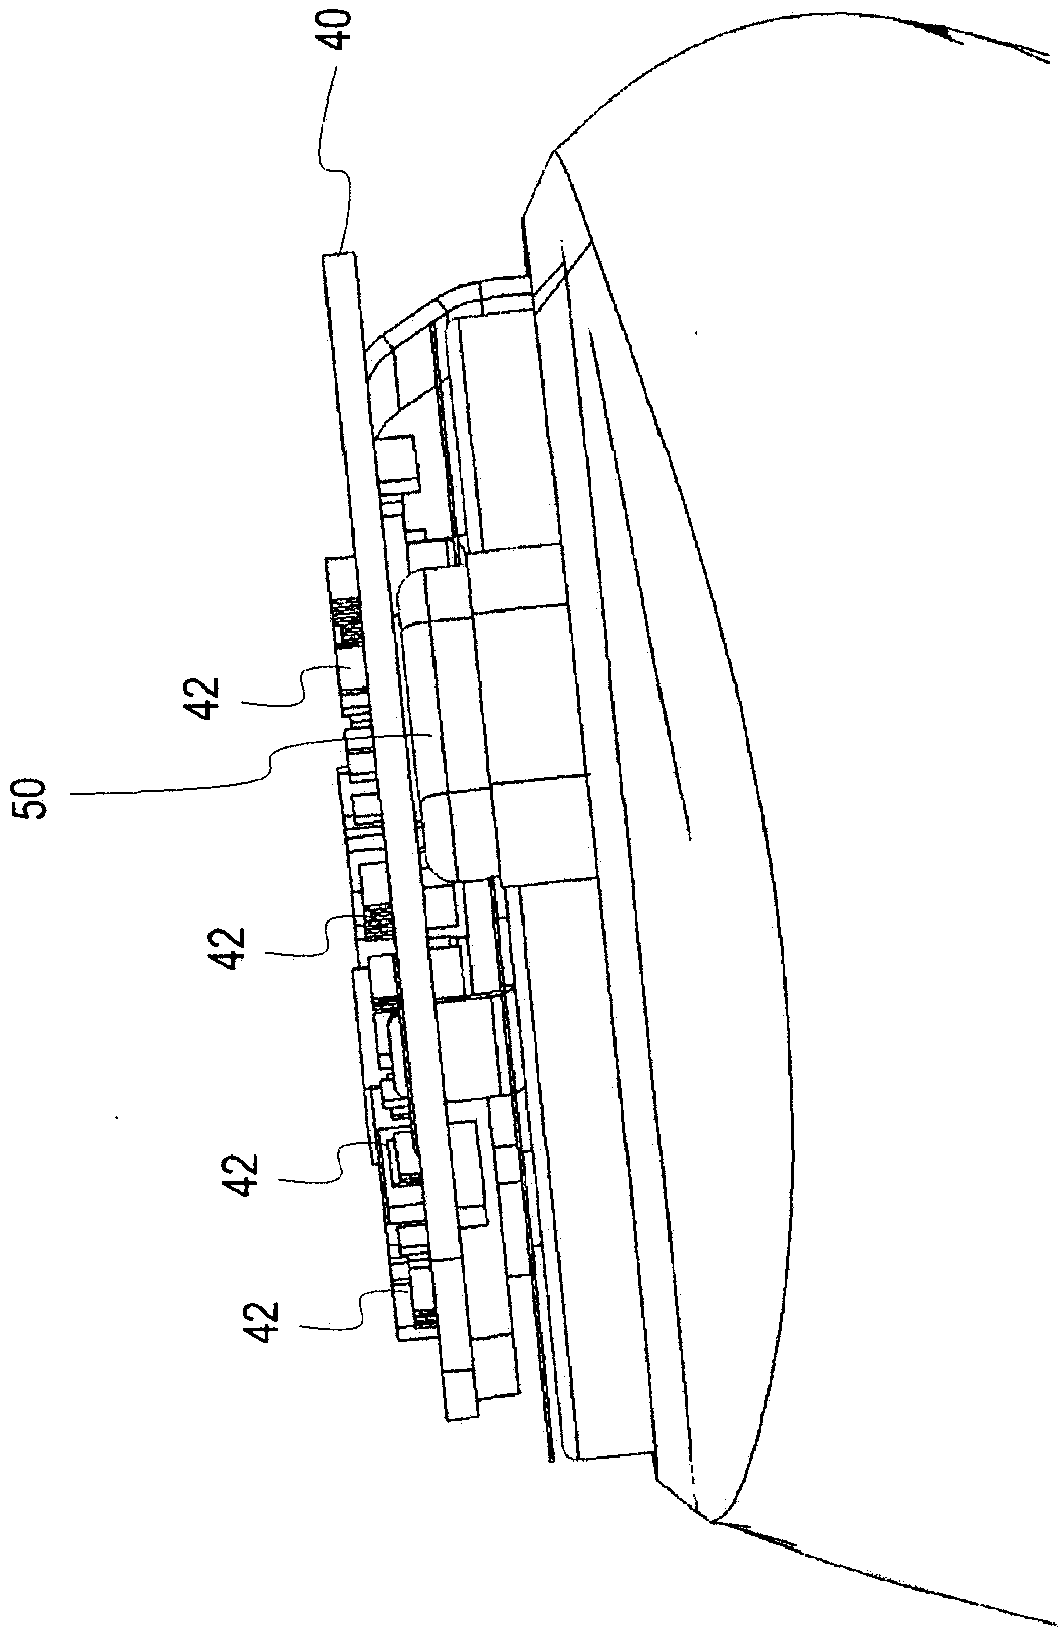 Antenna for use in wearable device